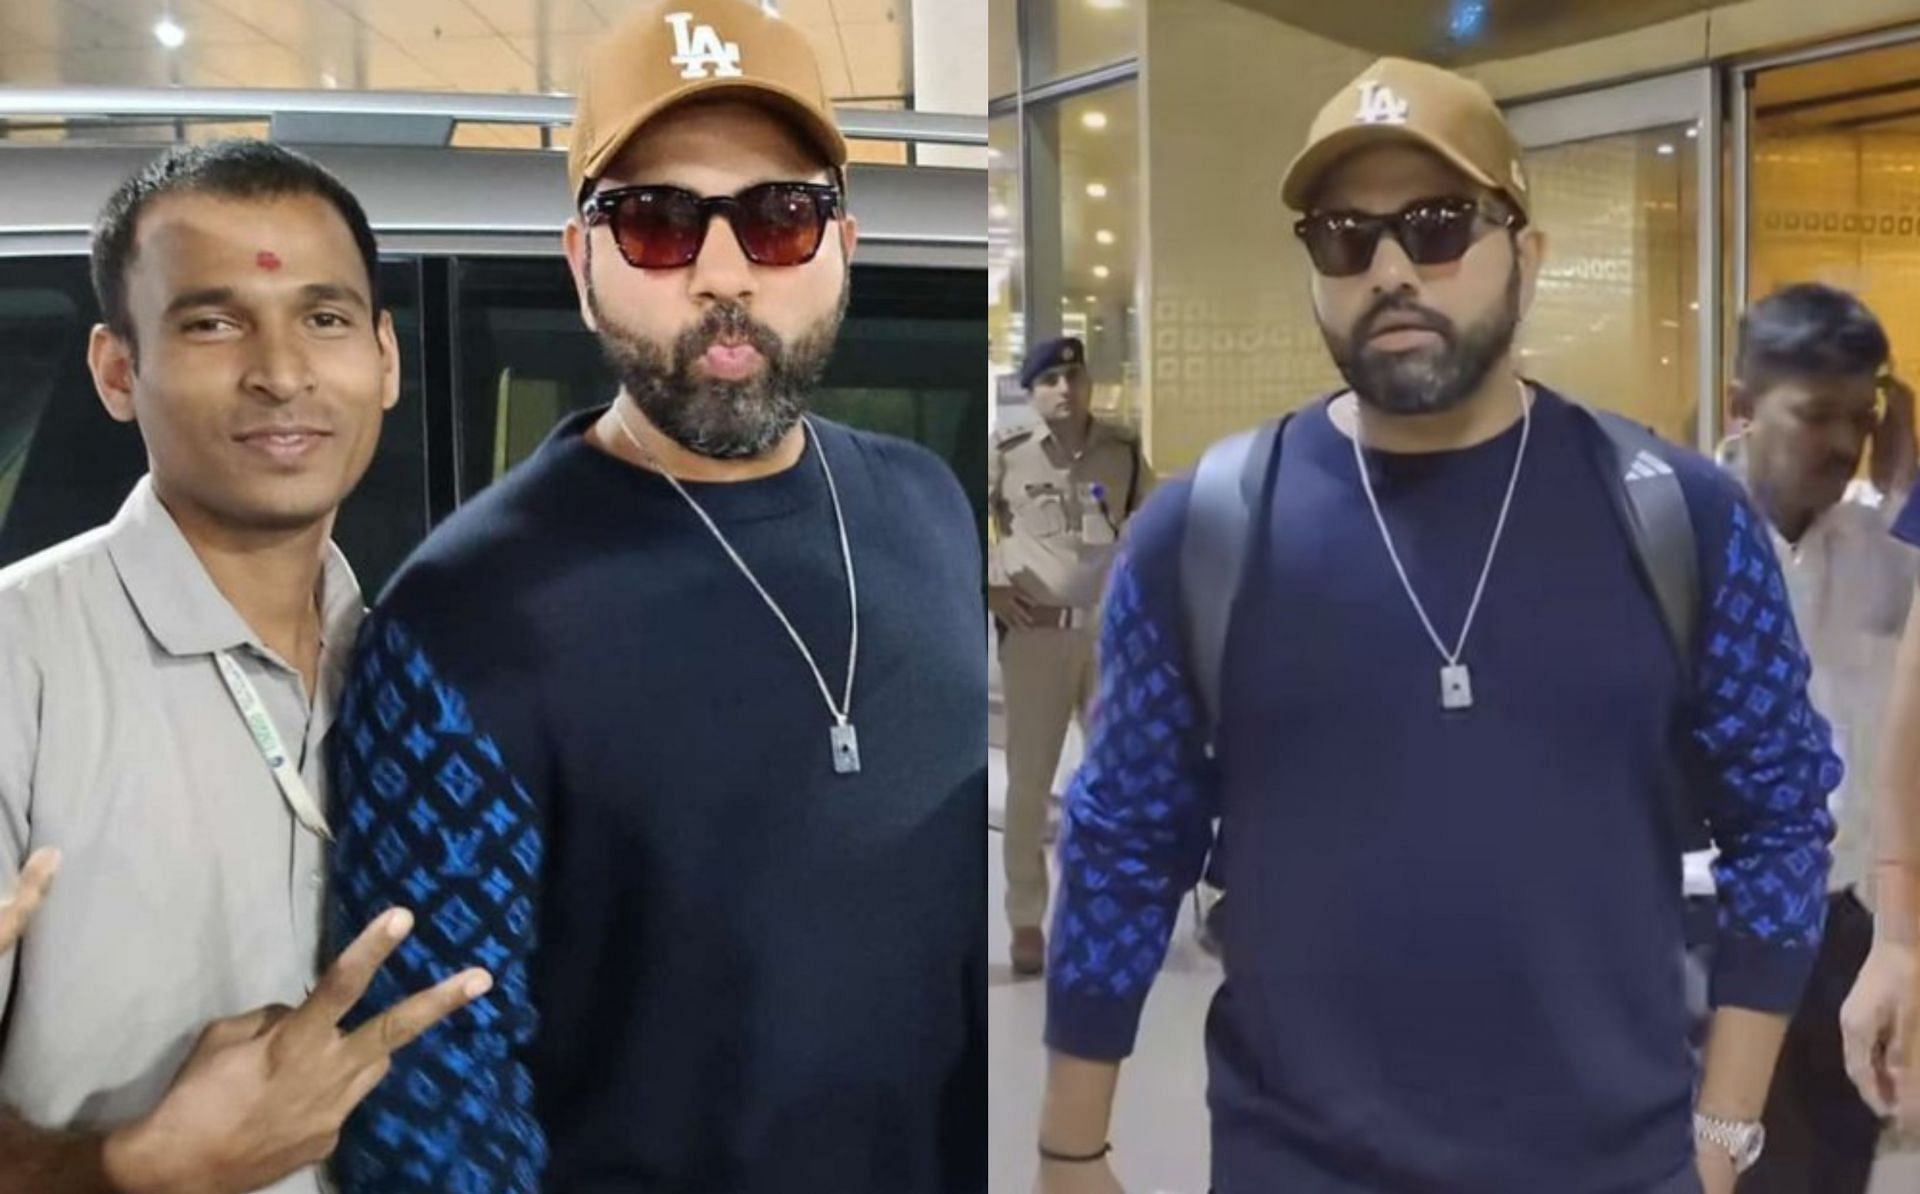 [Watch] Captain Rohit Sharma arrives in Mumbai after Team India draw Test series in South Africa 